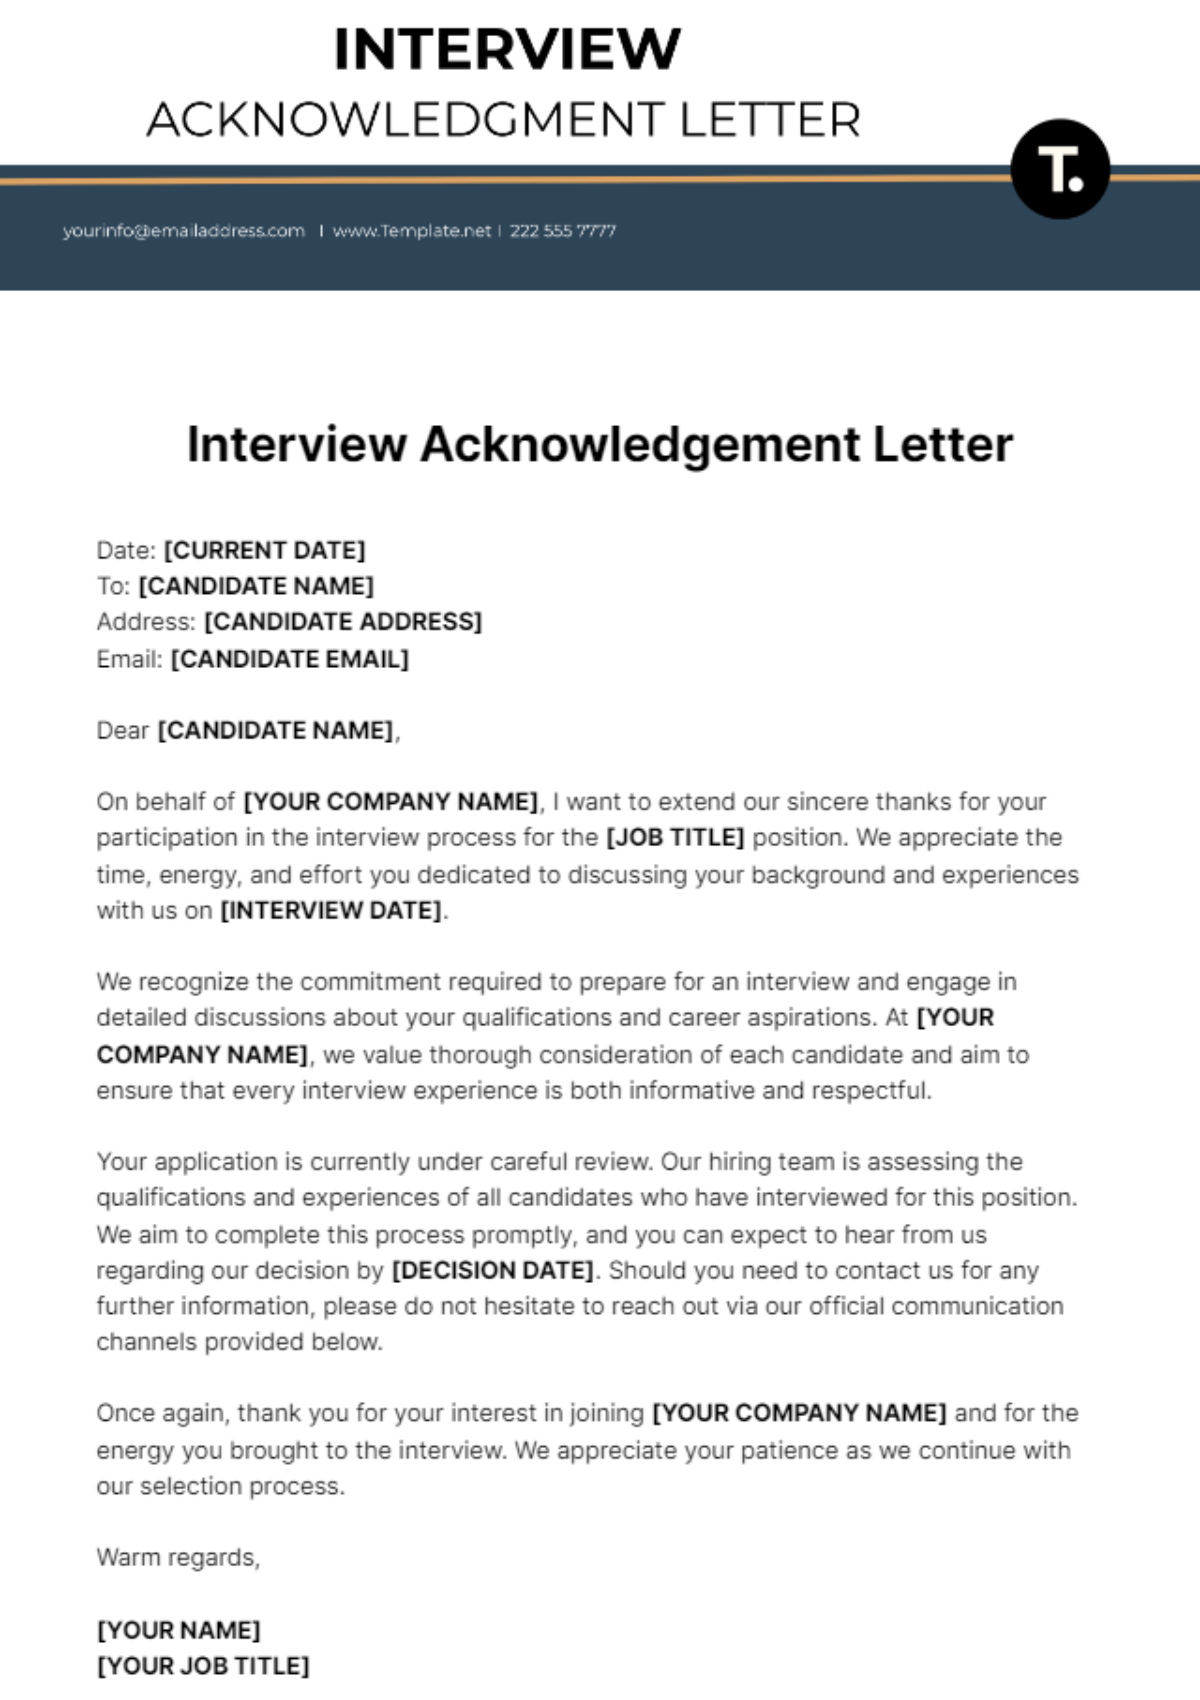 Interview Acknowledgment Letter Template